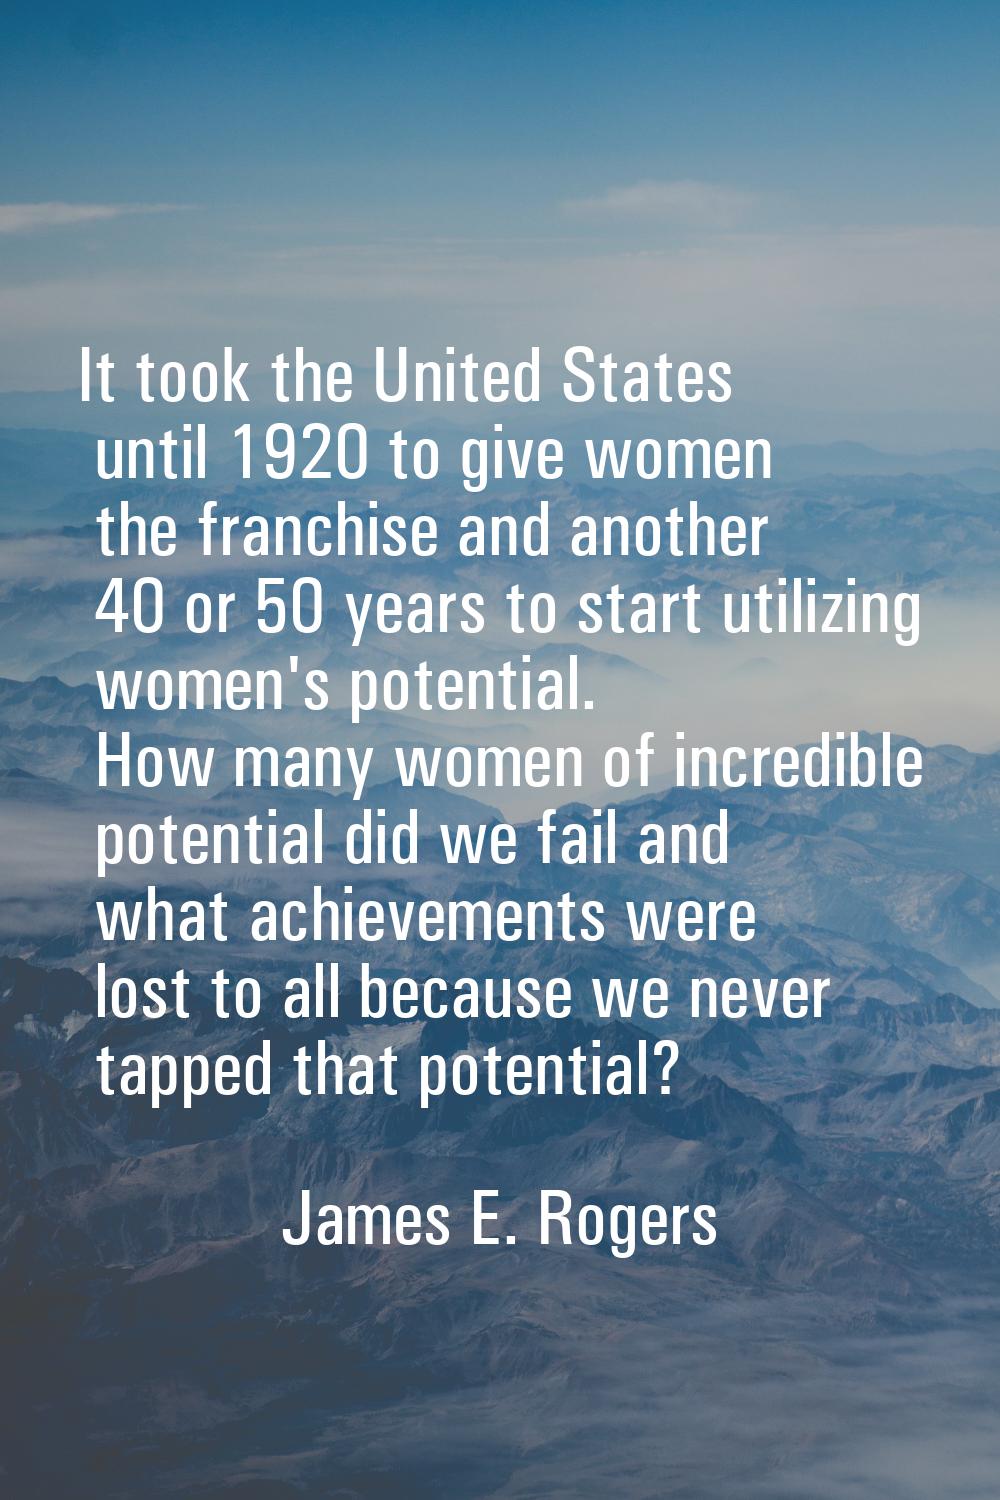 It took the United States until 1920 to give women the franchise and another 40 or 50 years to star